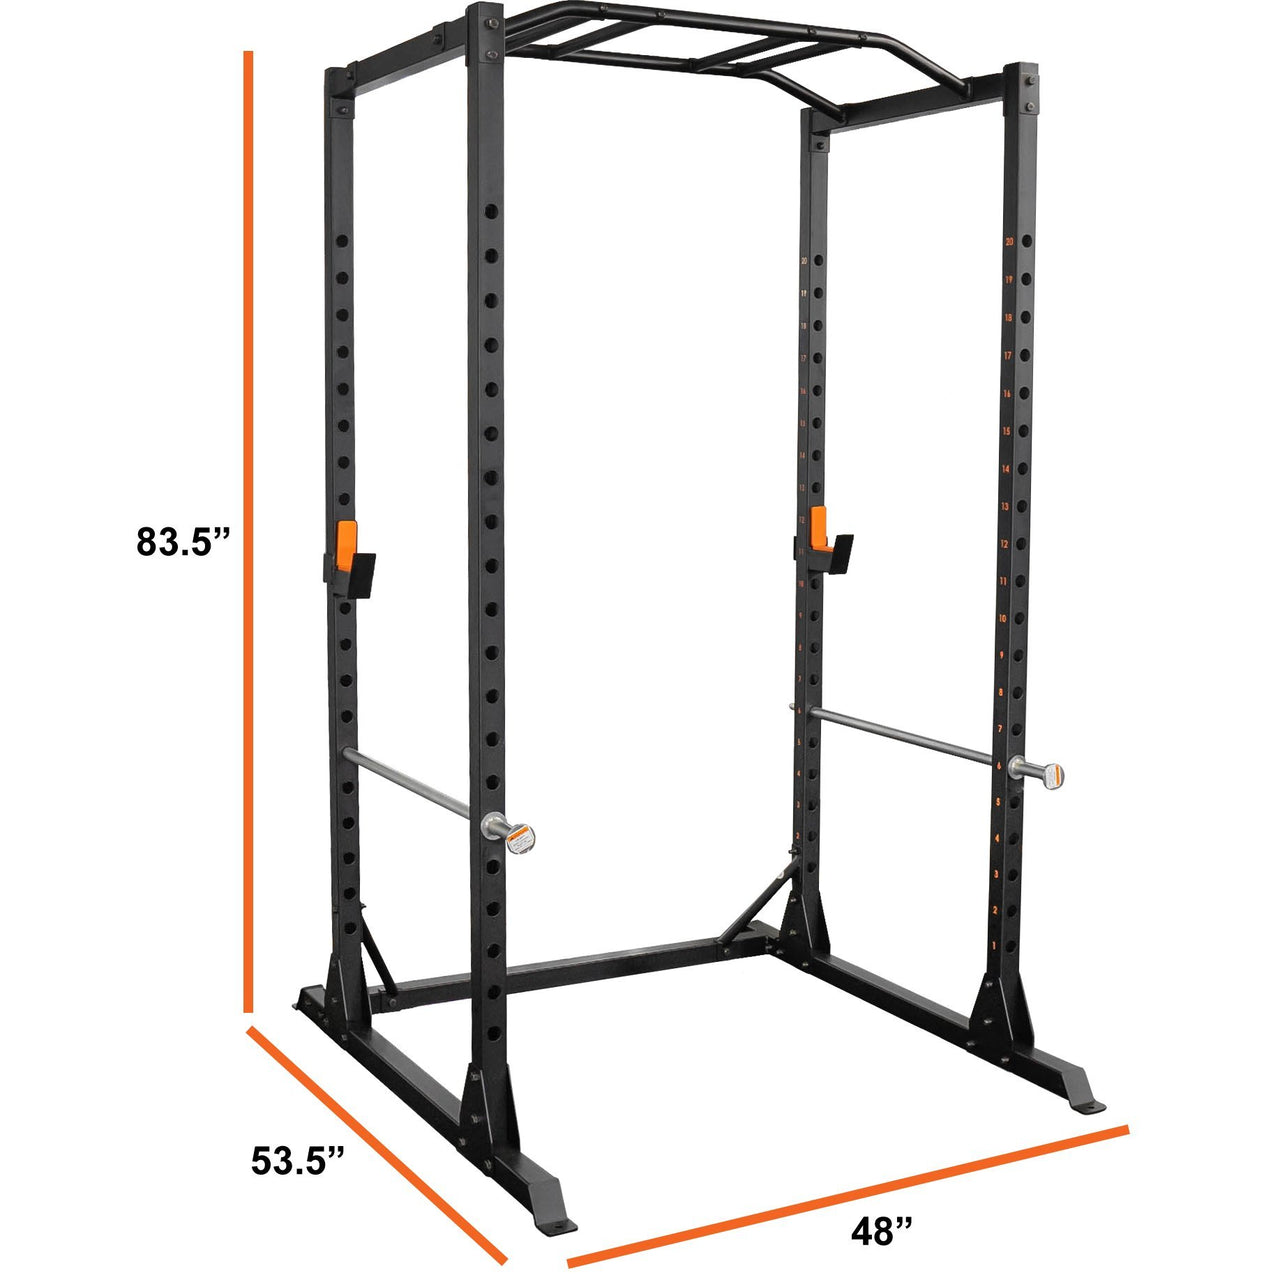 Dimensions of The GRIND Fitness Alpha3000 Full Cage